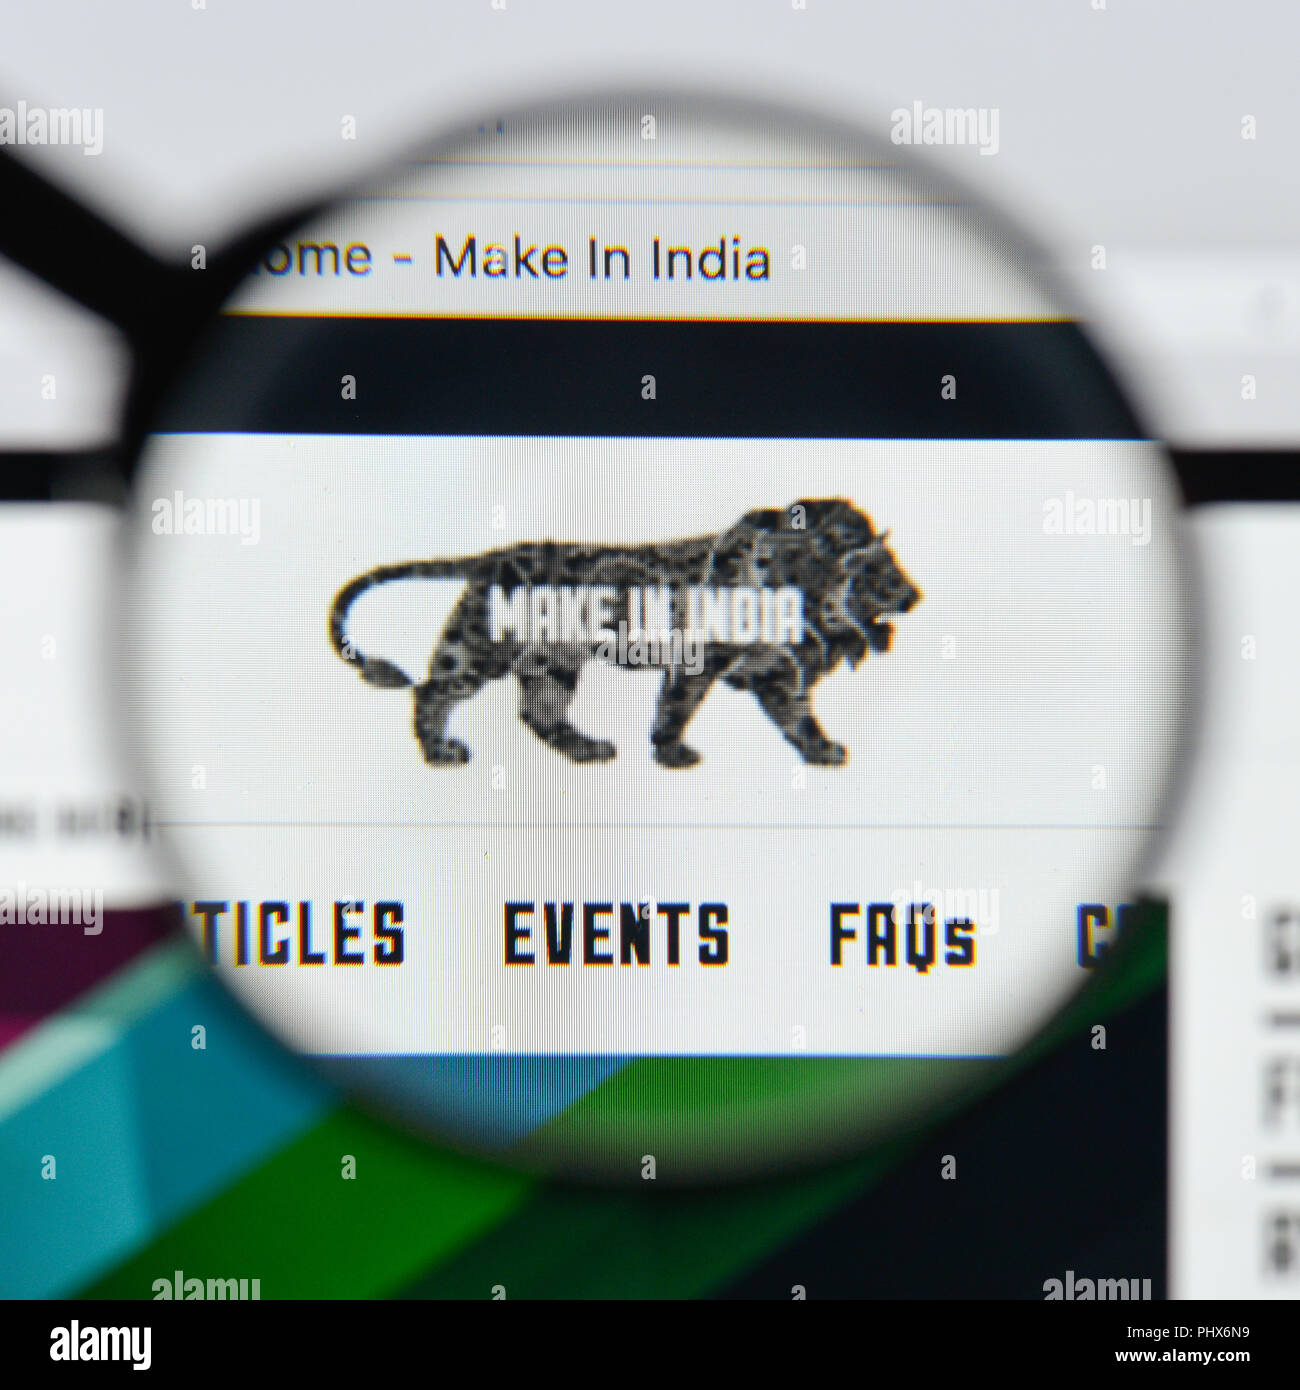 Milan, Italy - August 20, 2018: Make in India website homepage. Make in India logo visible. Stock Photo